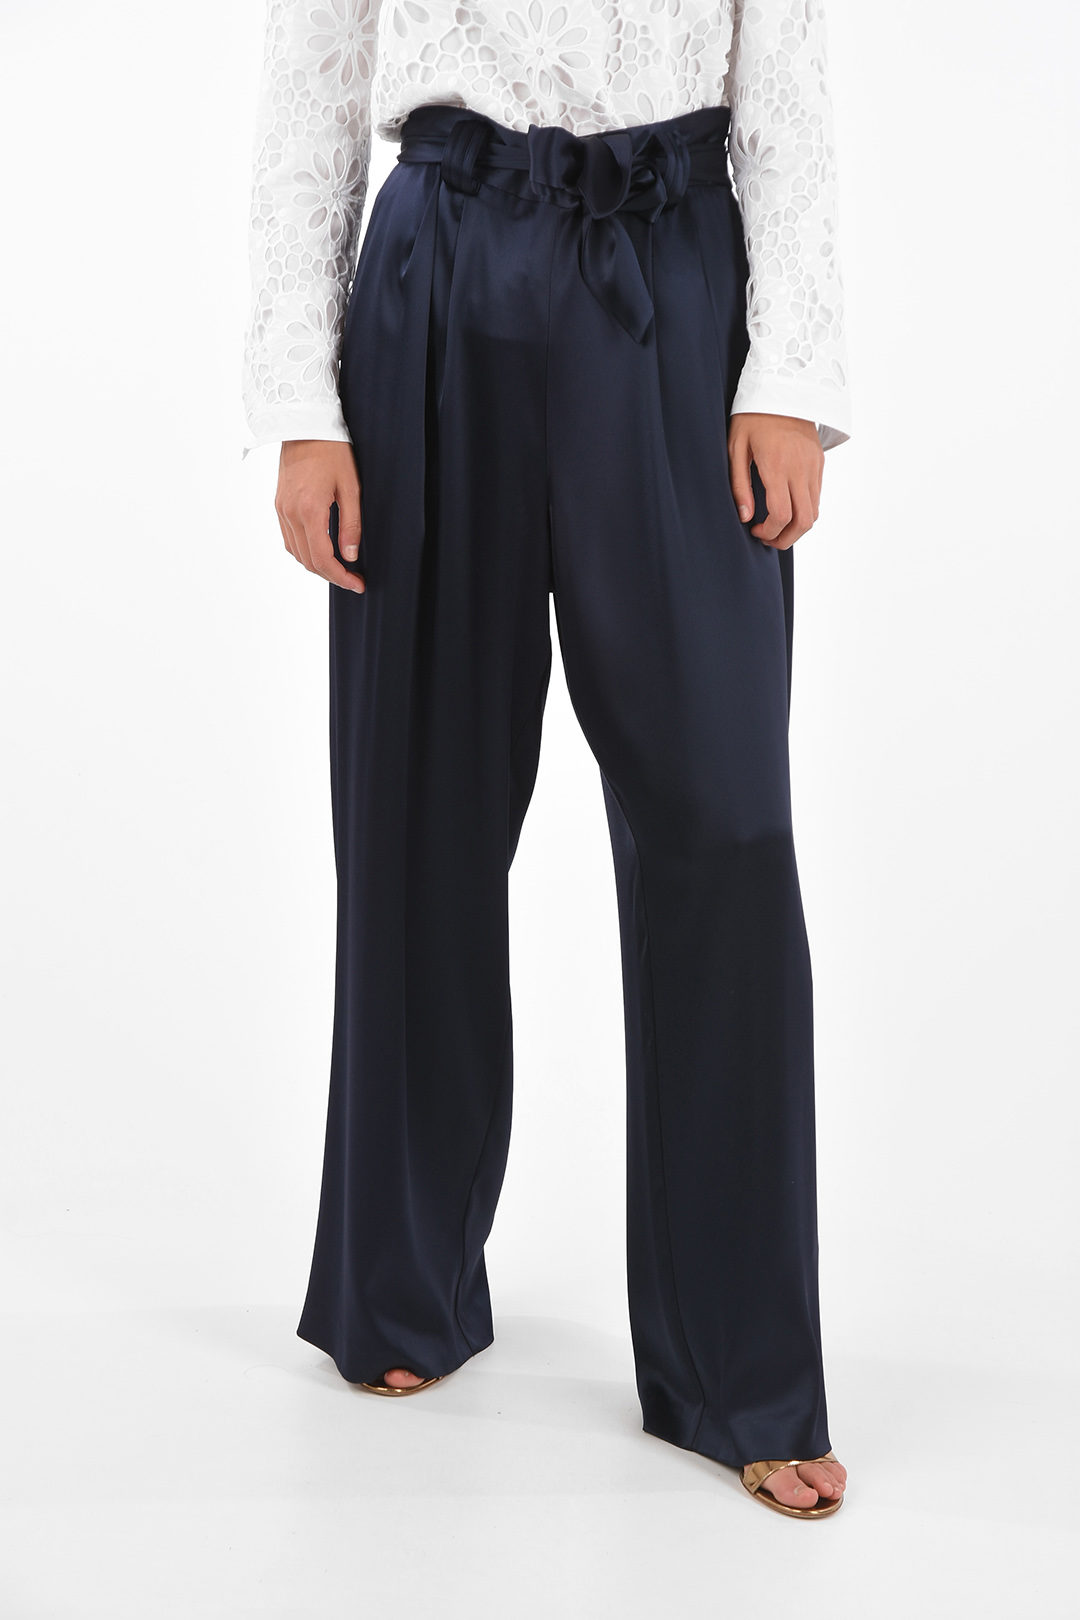 Tory Burch satin high-rise waist palazzo pants with belt women - Glamood  Outlet